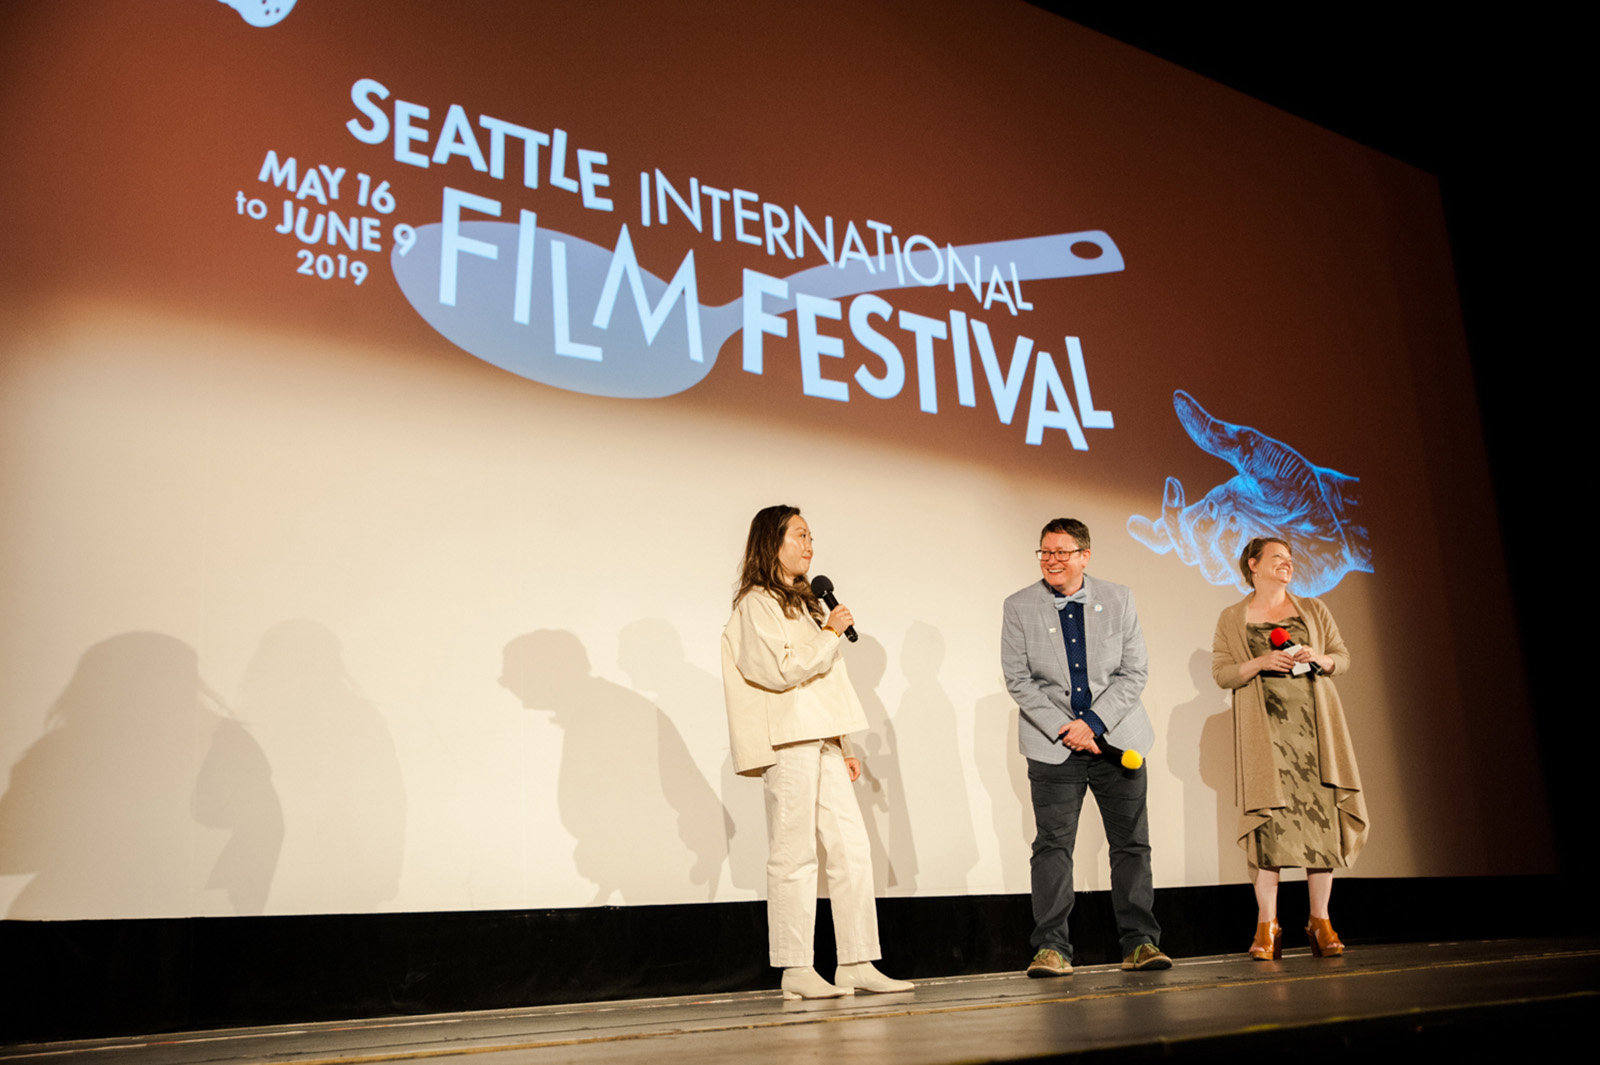 Director, Lulu Wang, answers questions from SIFF's Beth Barrett and Amy Fulford after the screening of her film, The Farewell, on Closing Night